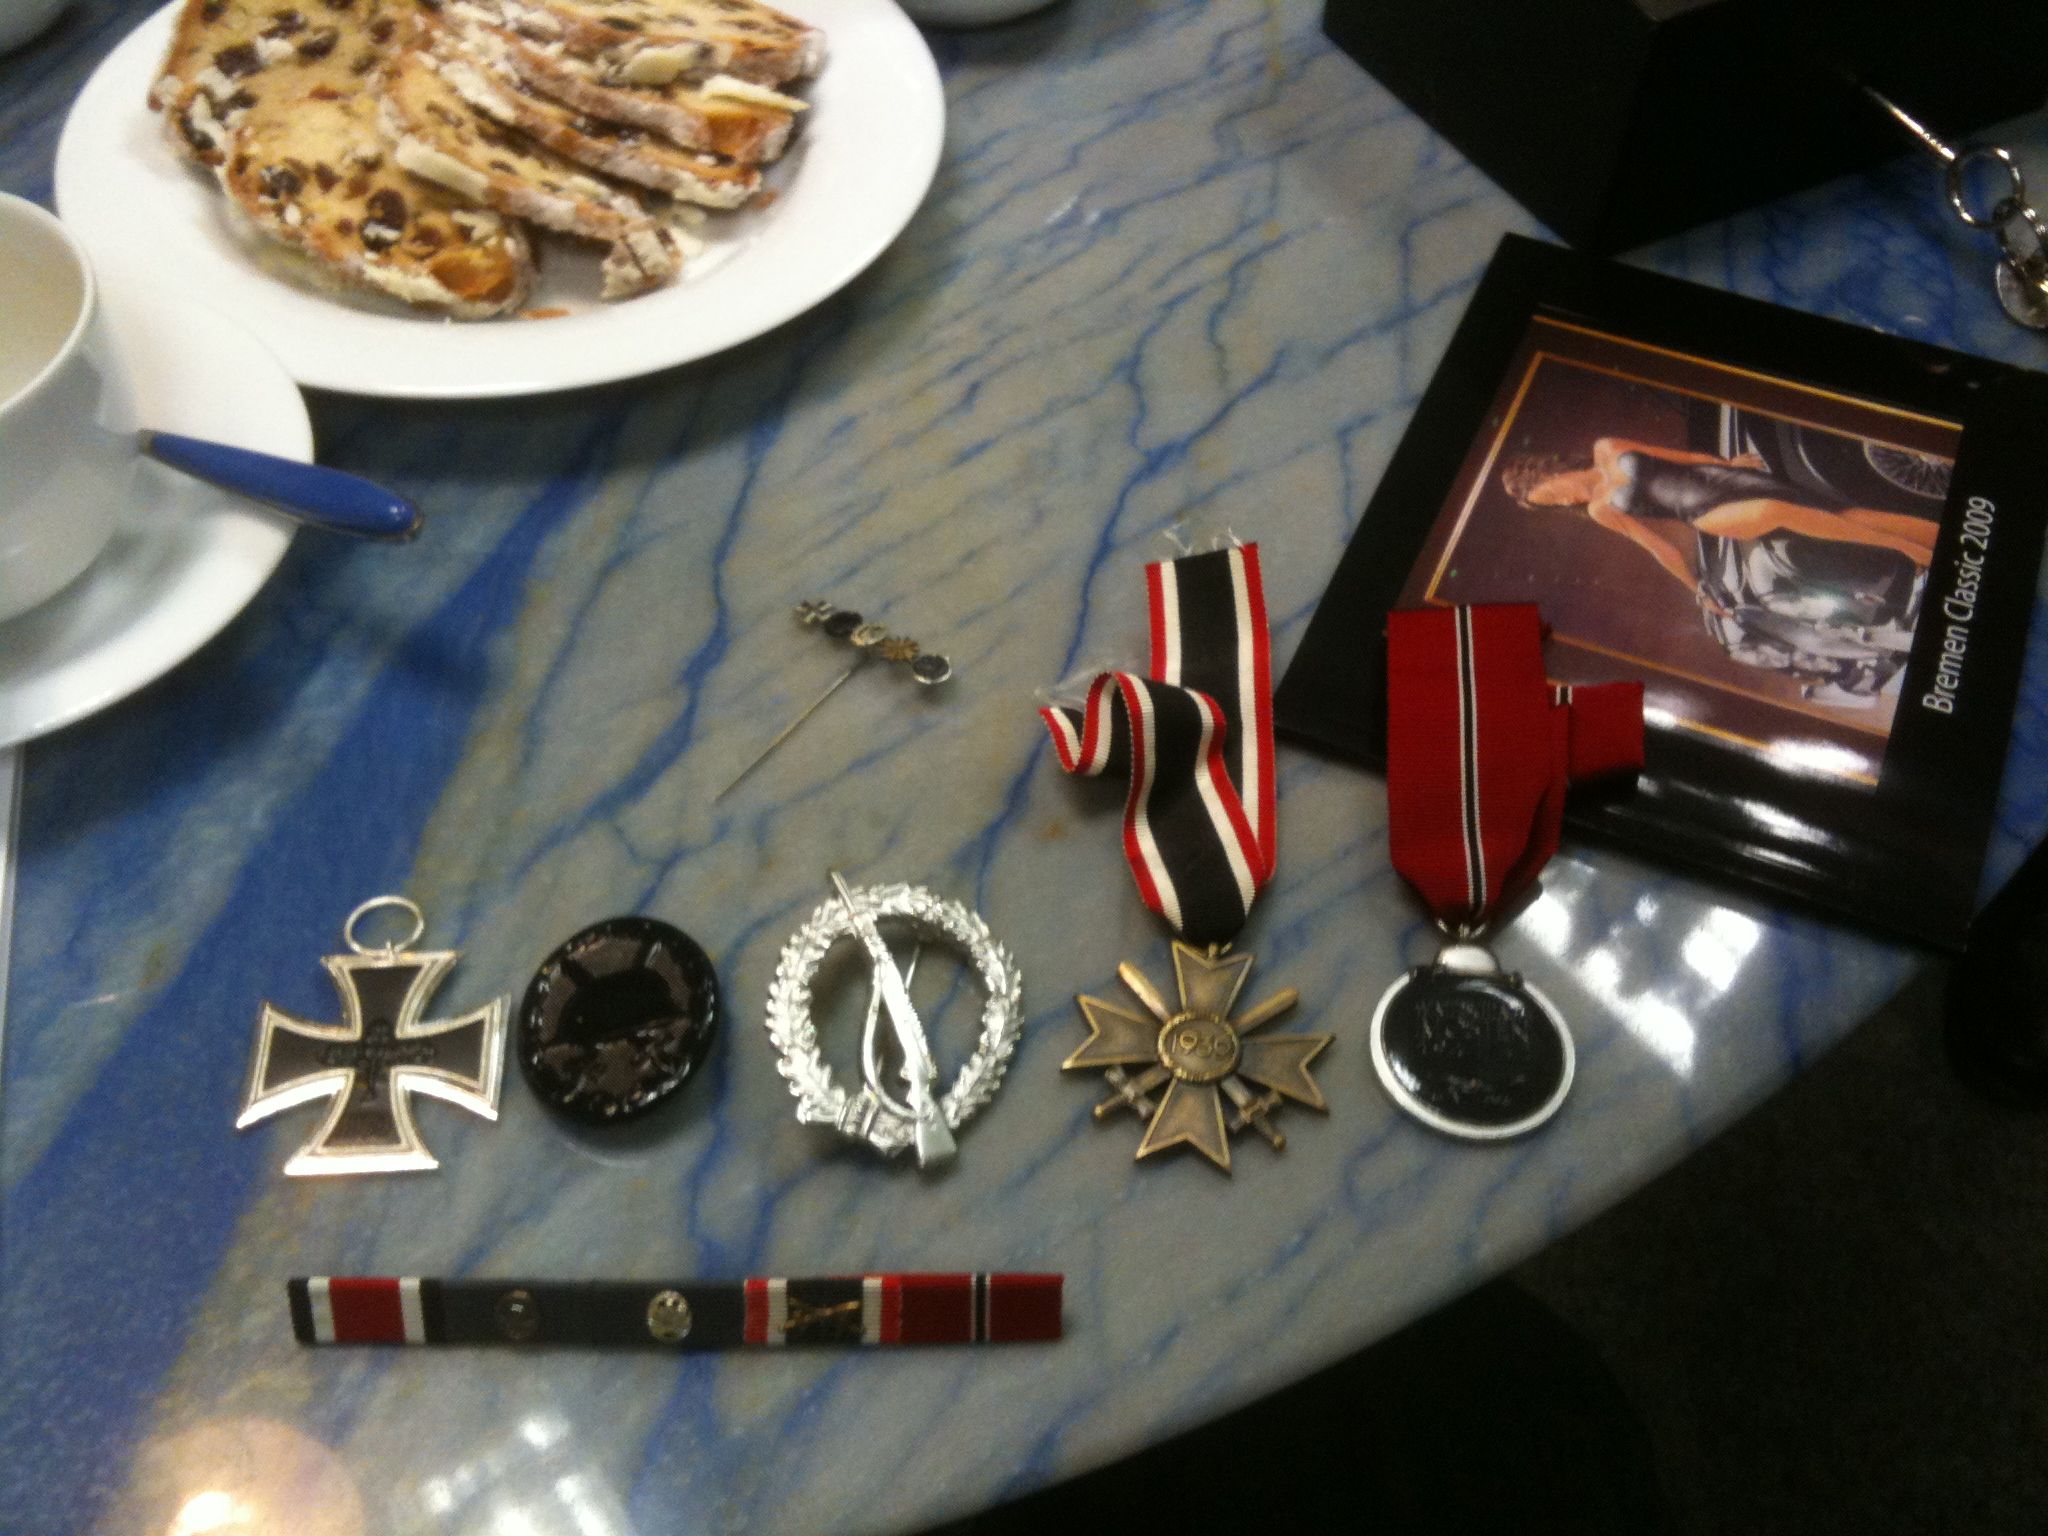 Please help identify and provide details on the medals